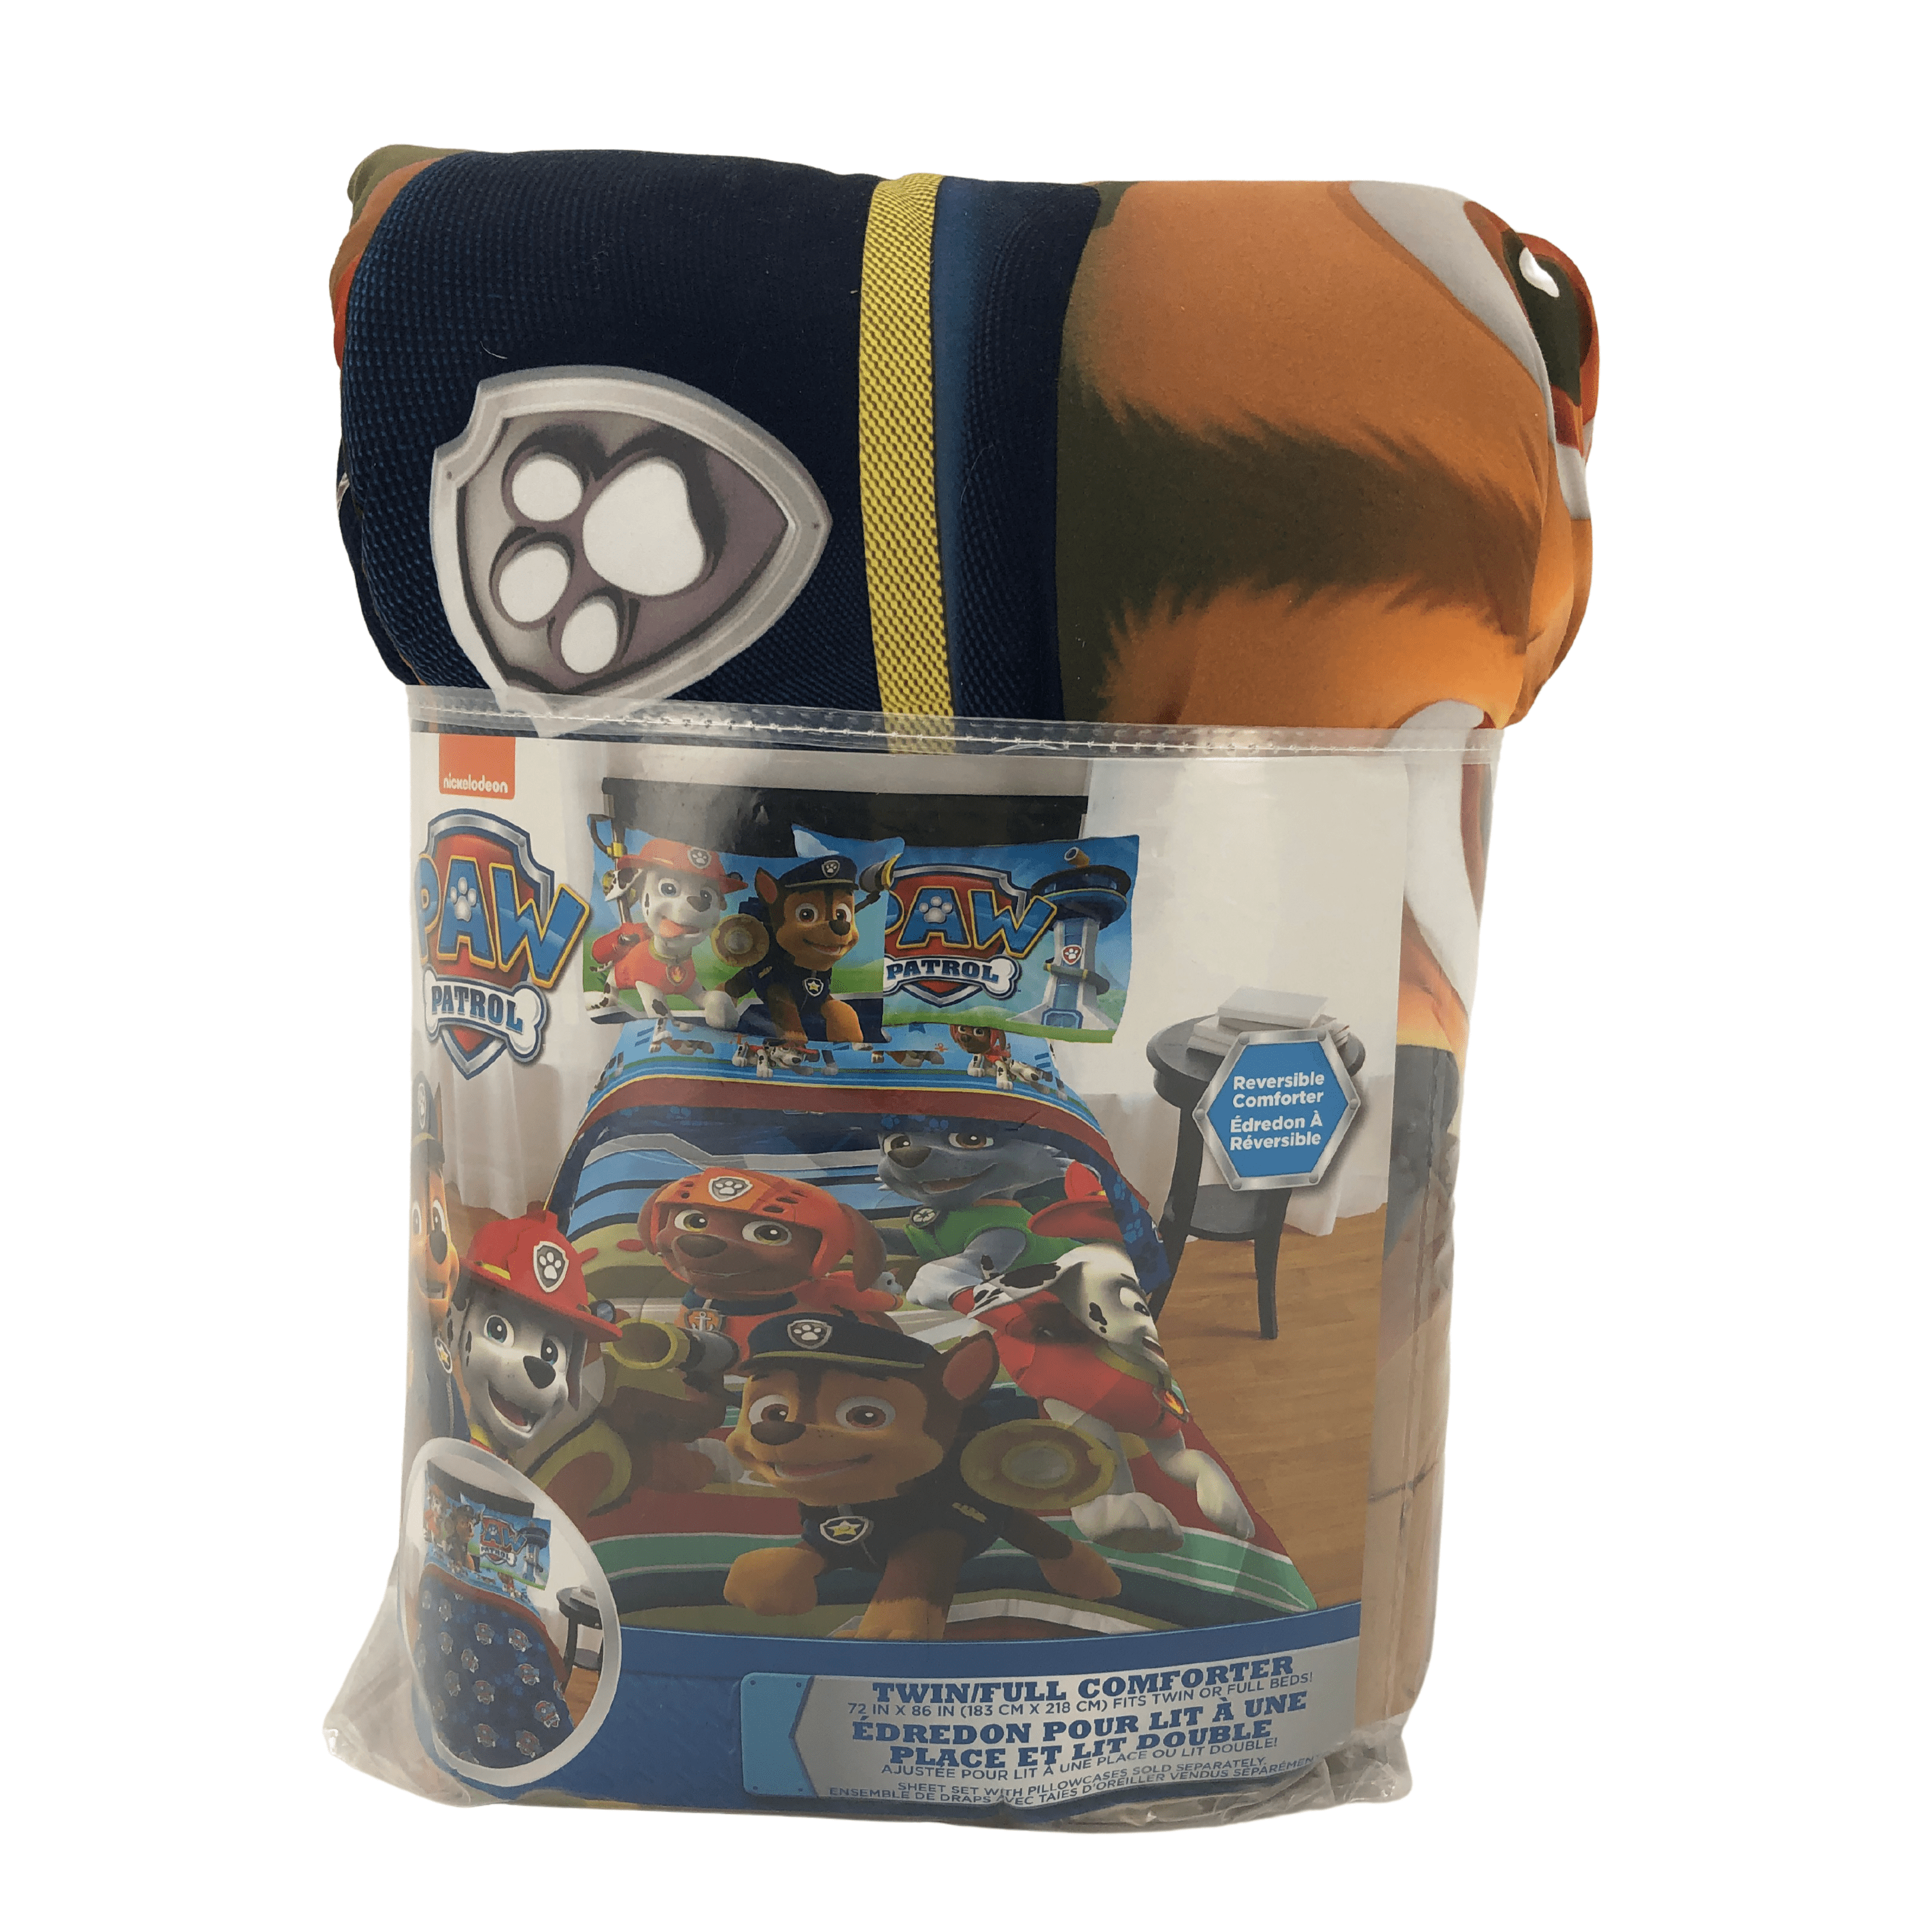 Paw Patrol Twin/Full Reversible Comfort for a kids bed. Double sided